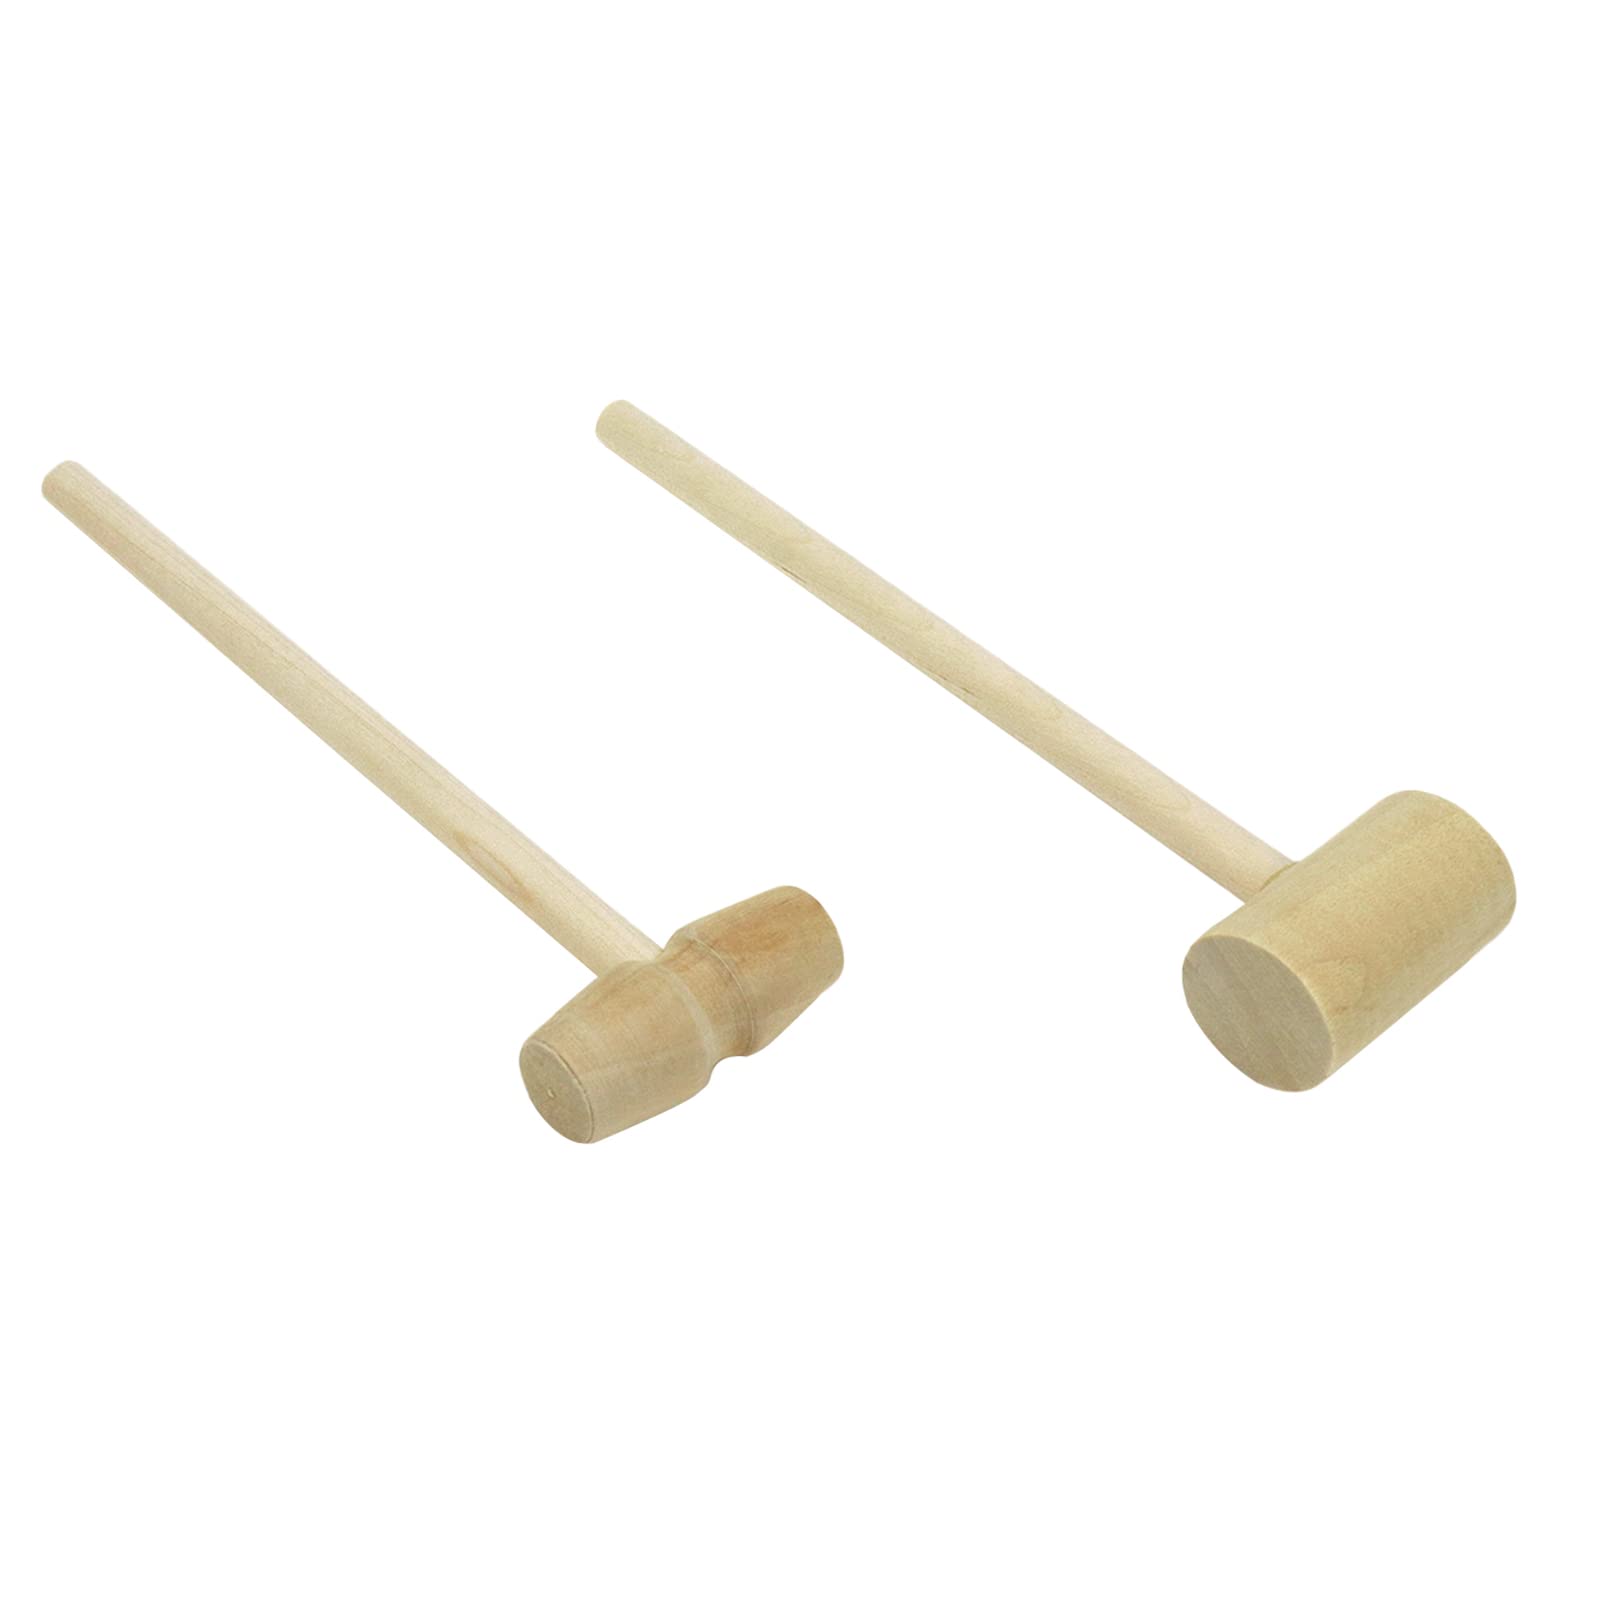 LC LICTOP Mini Wooden Hammers Small Wood Mallets Hammers for Chocolate Natural Hardwood Crab Lobster Seafood Mallets 20pcs (Round + Oval Combination)